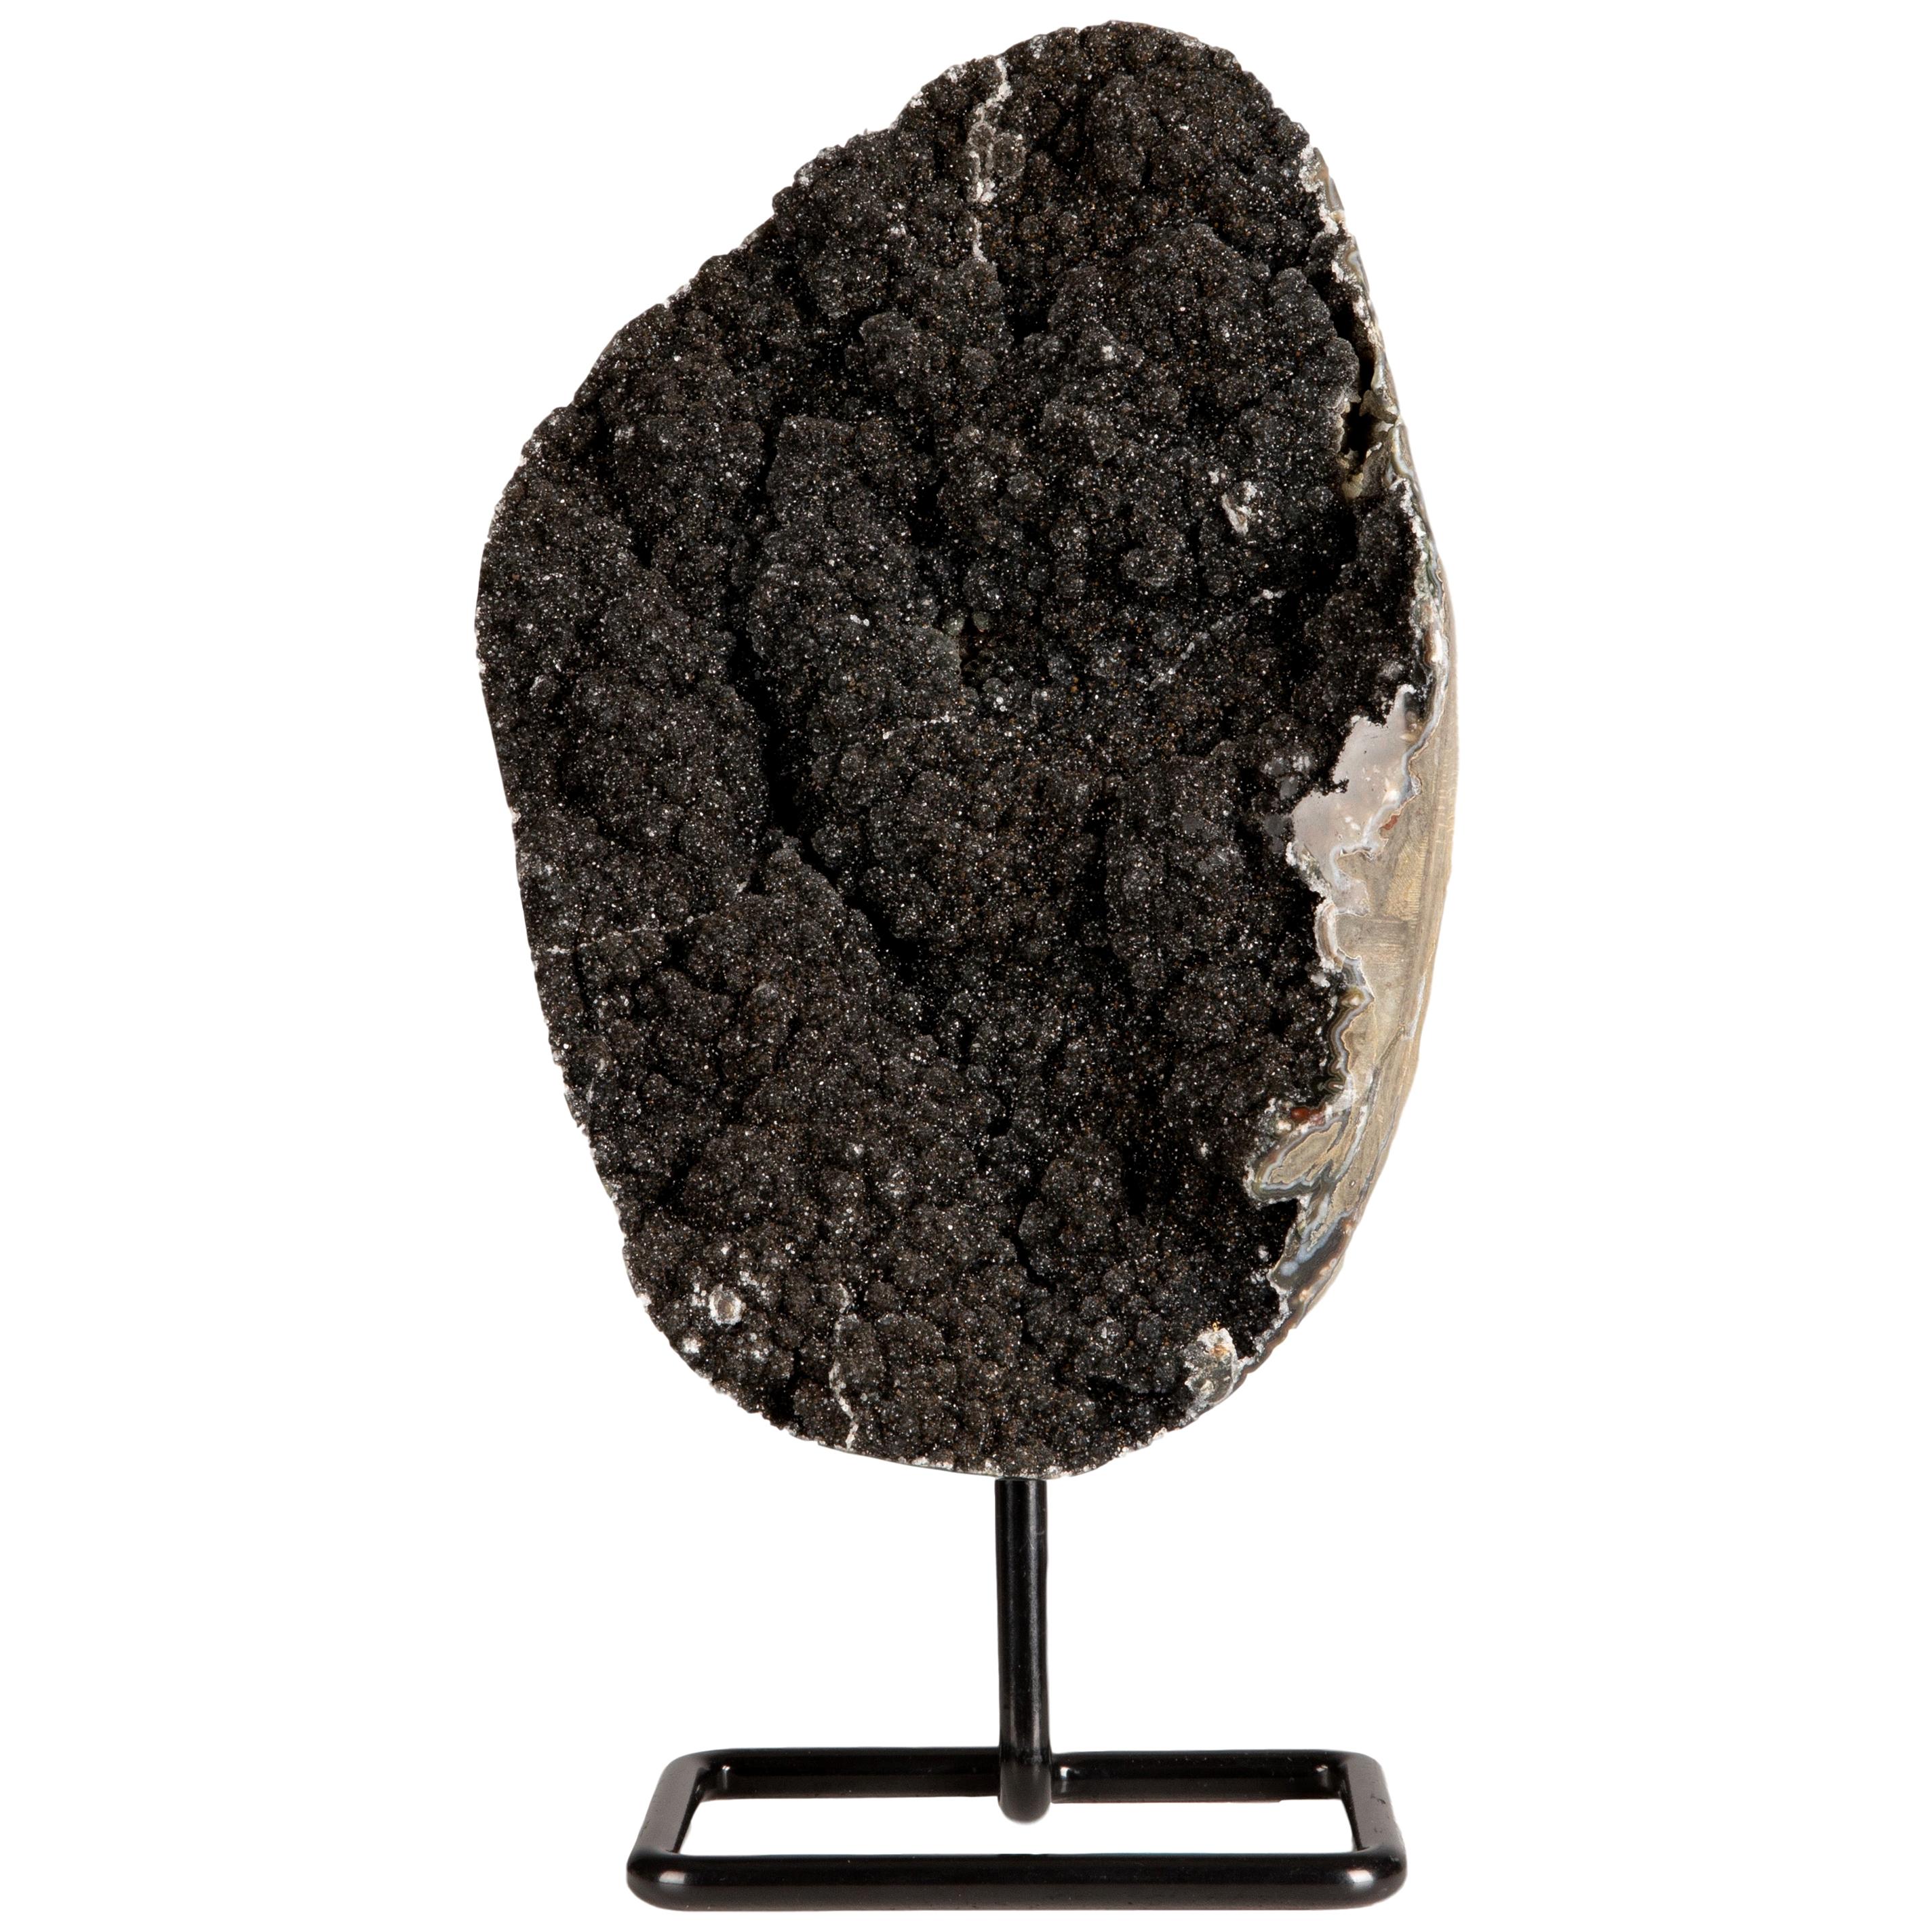 Unusual Black Amethyst Druze Formation on Metal Stand For Sale